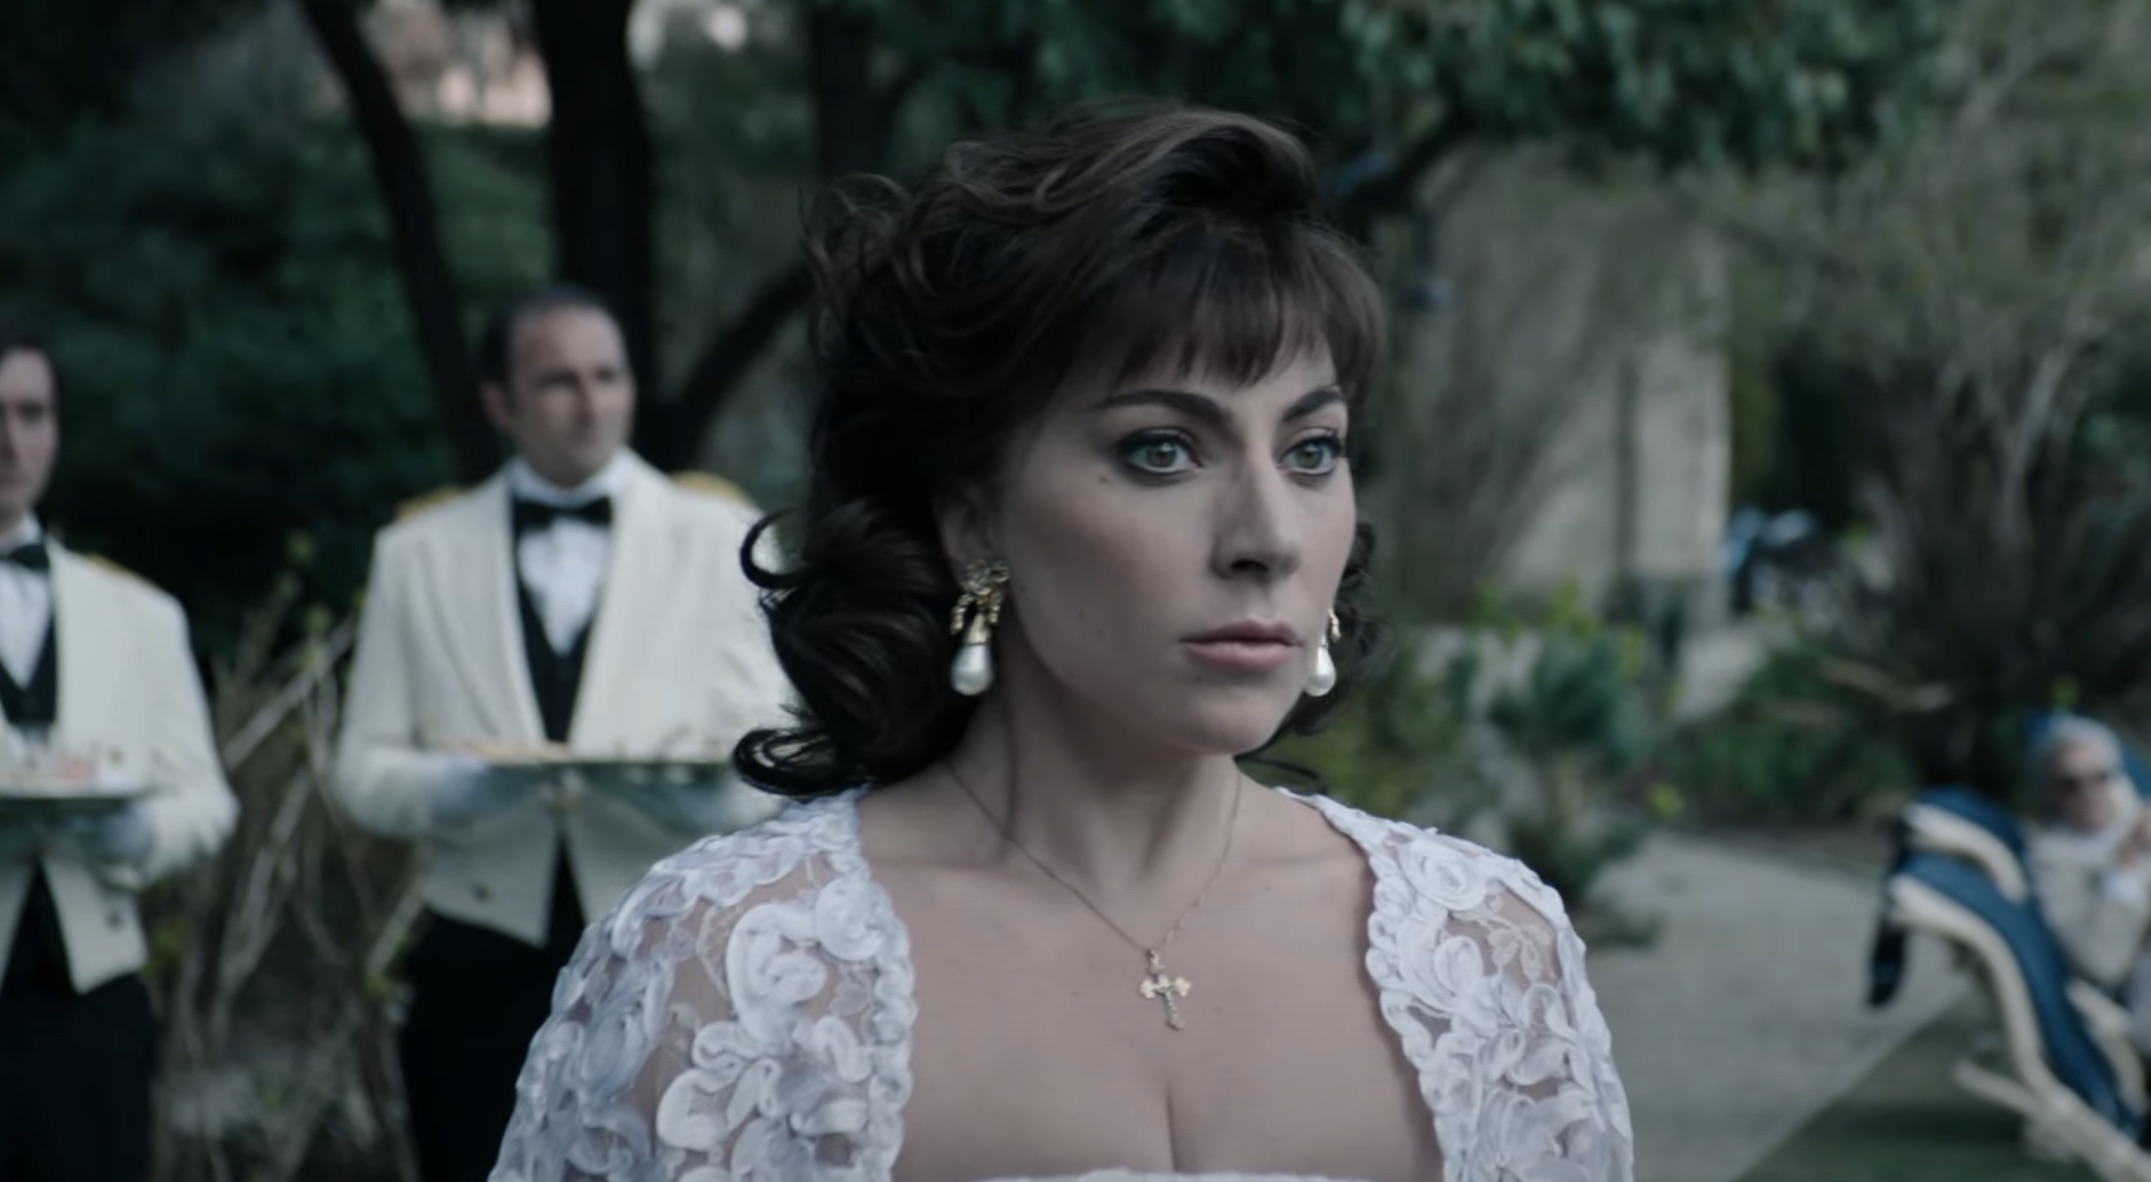 Extended Movie Trailer: 'House of Gucci' [Starring Lady Gaga] - That ...